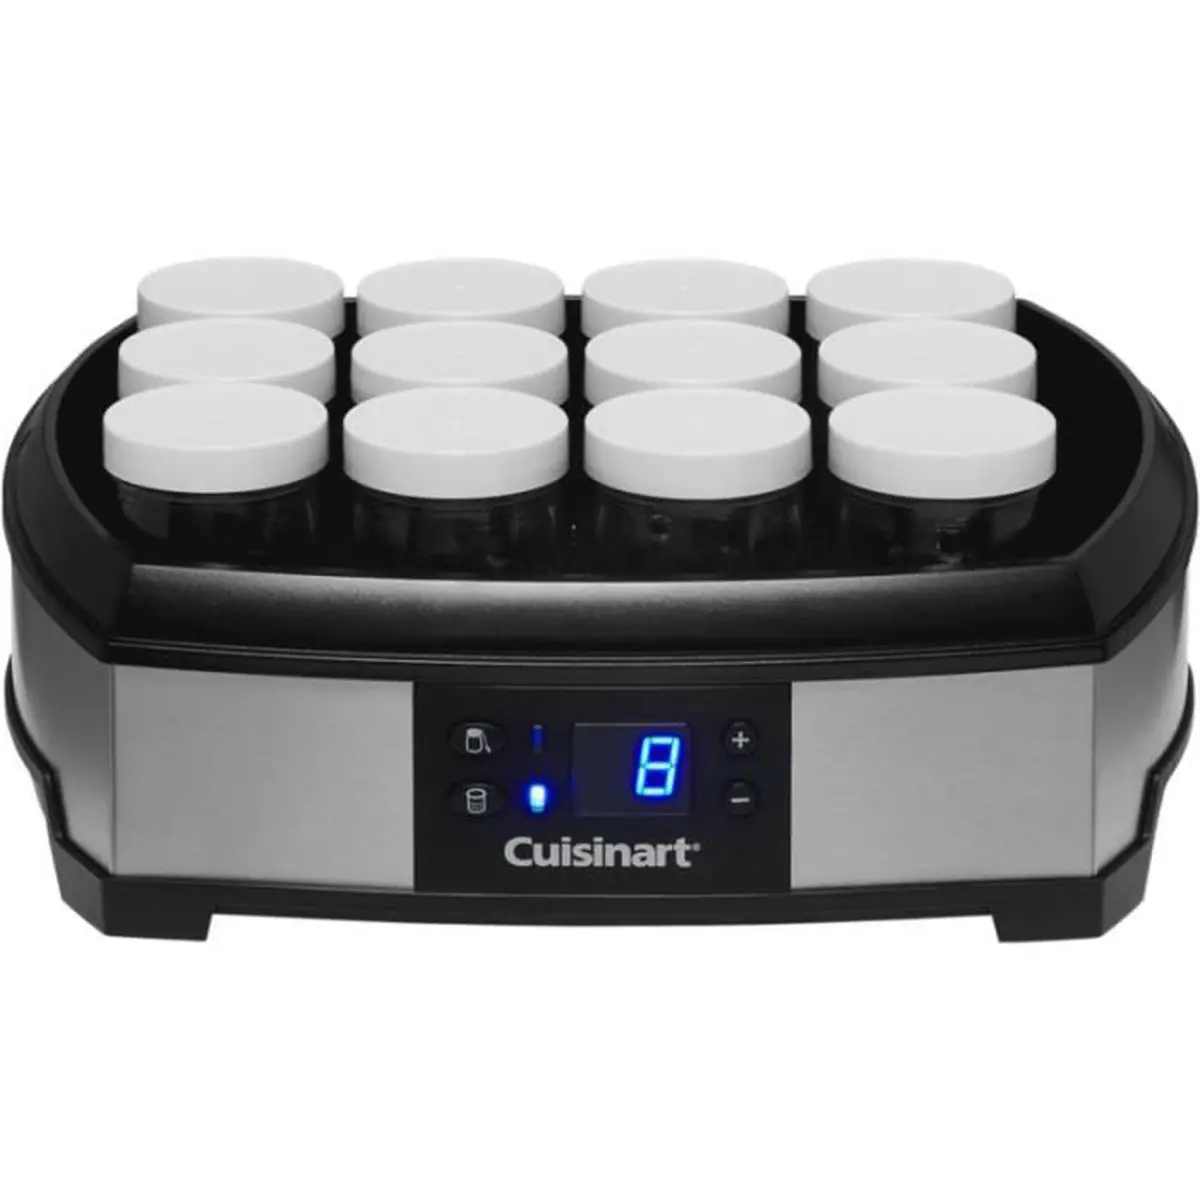 yaourtiere et fromagere cuisinart ym400e 12 pots 2